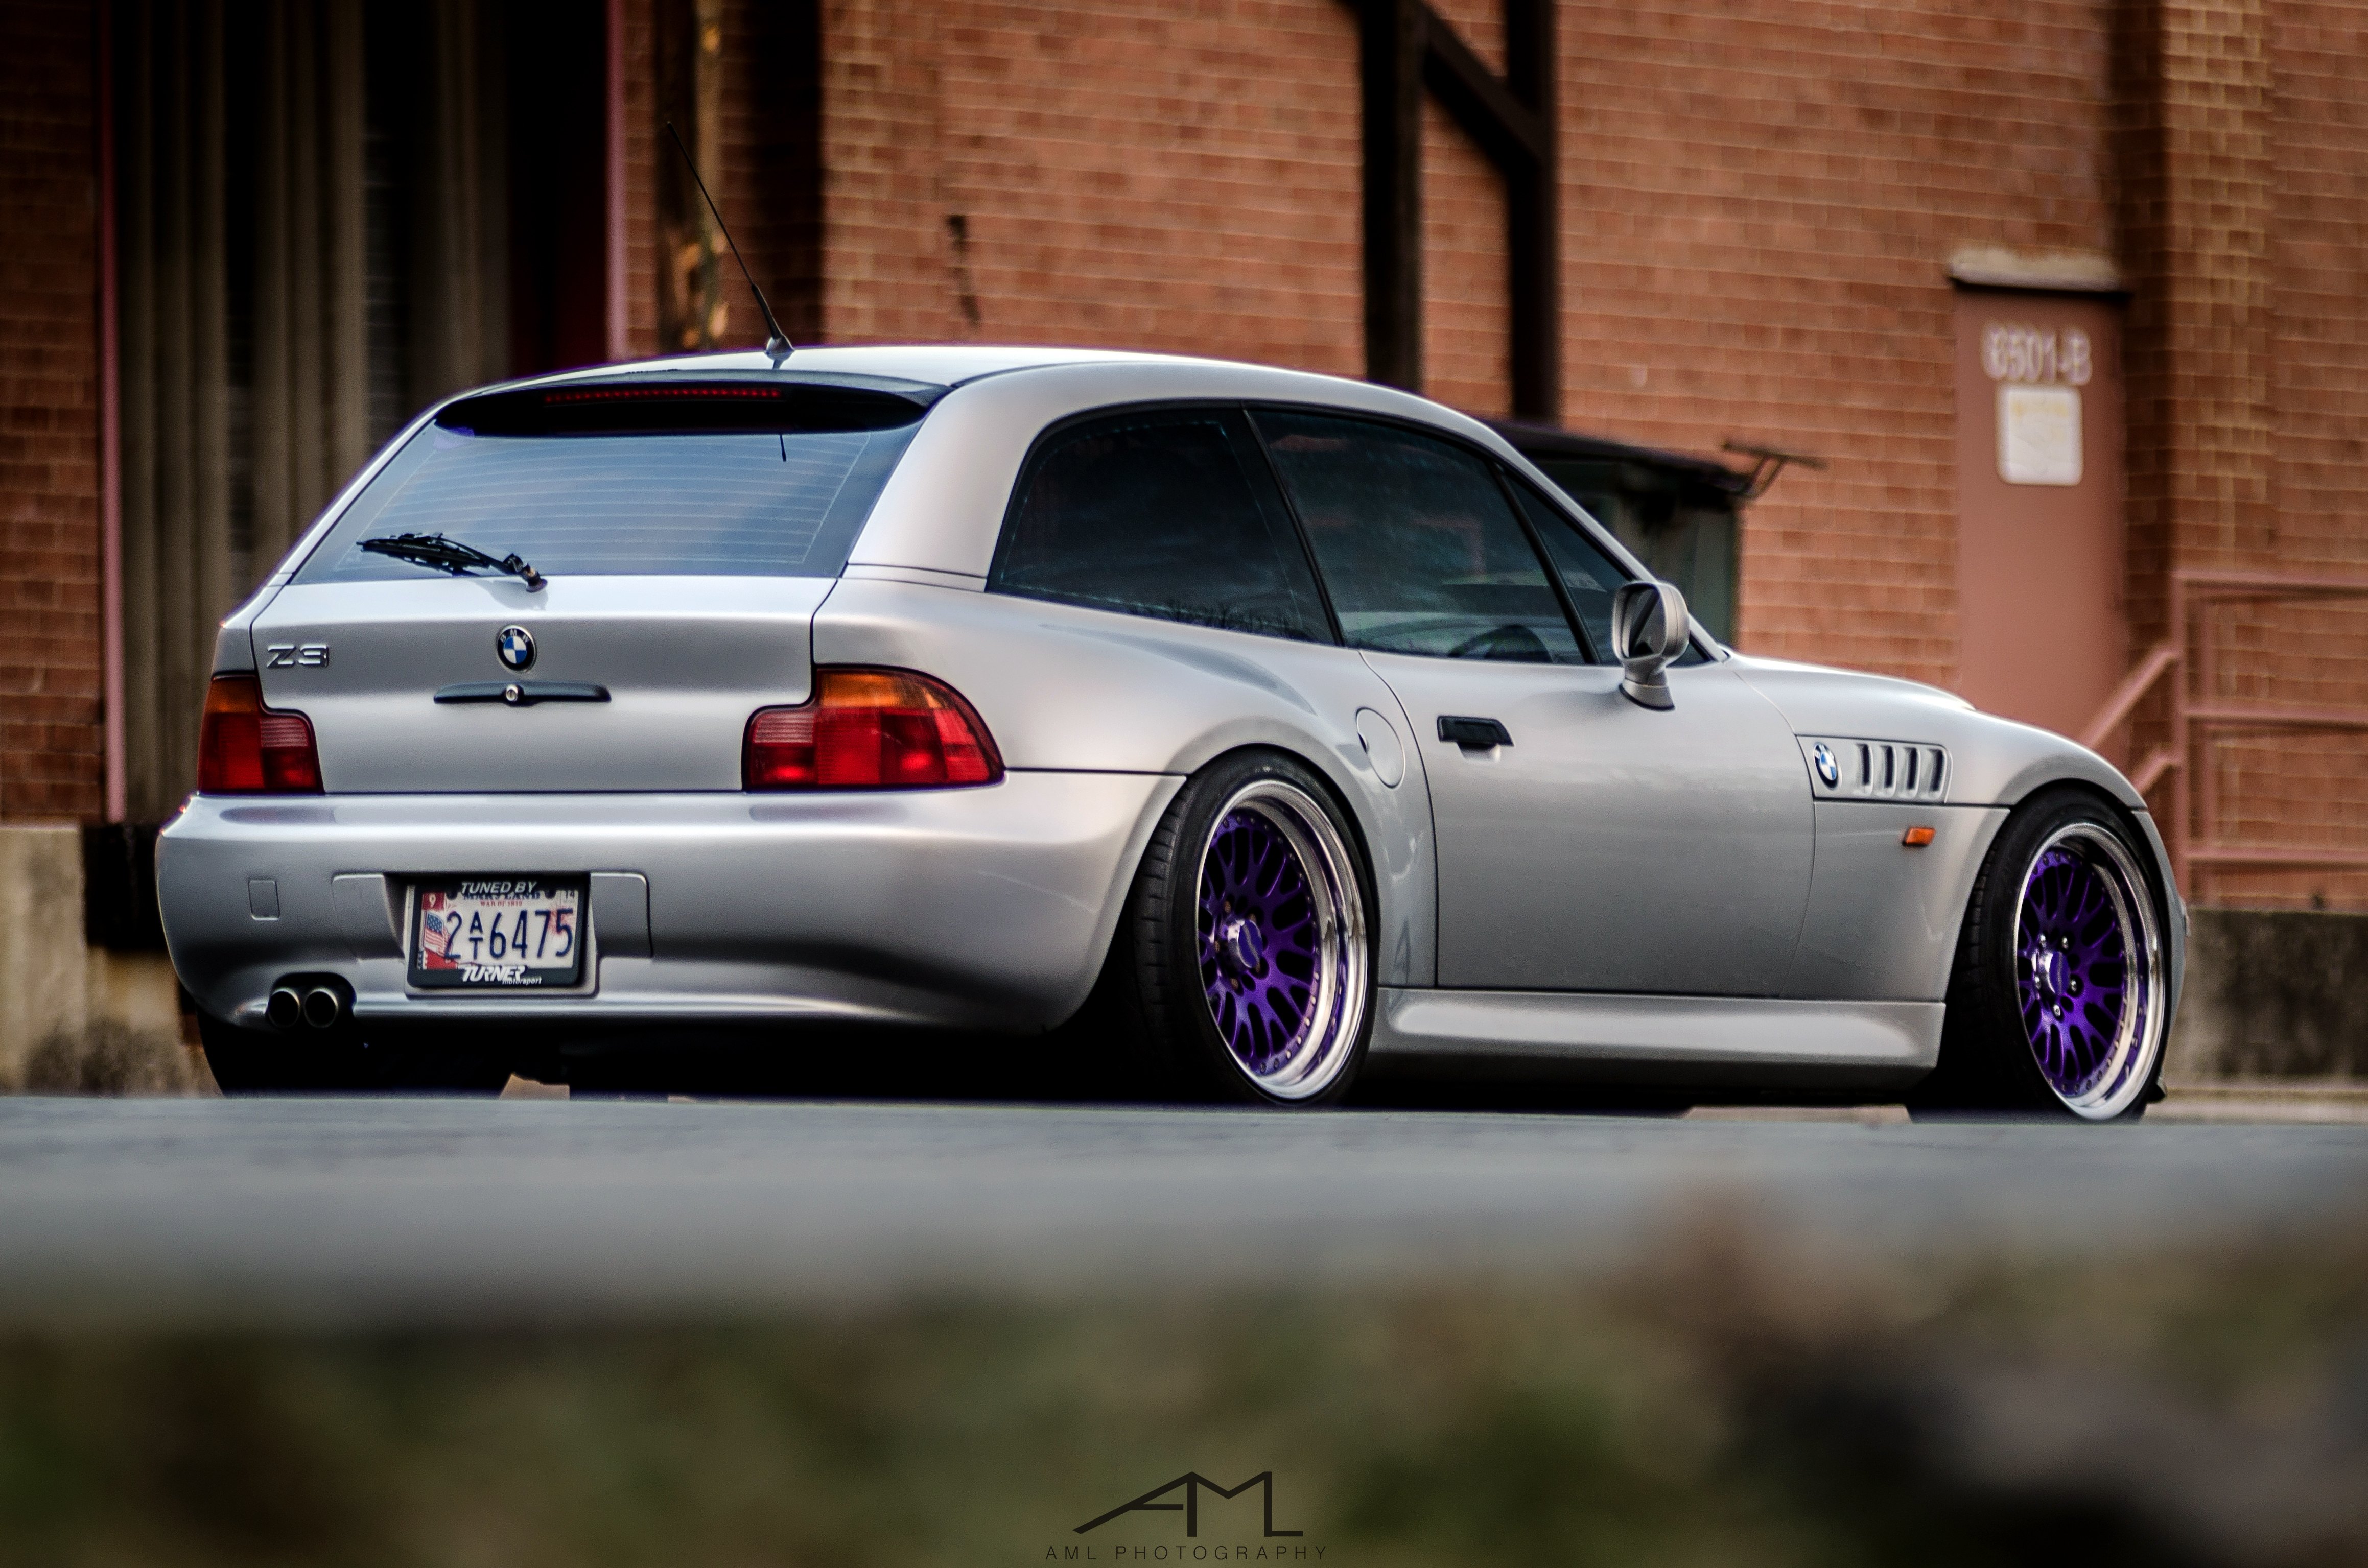 Not Your Ordinary BMW Z3: Wearing Silver Paint and Matte Purple Rims.